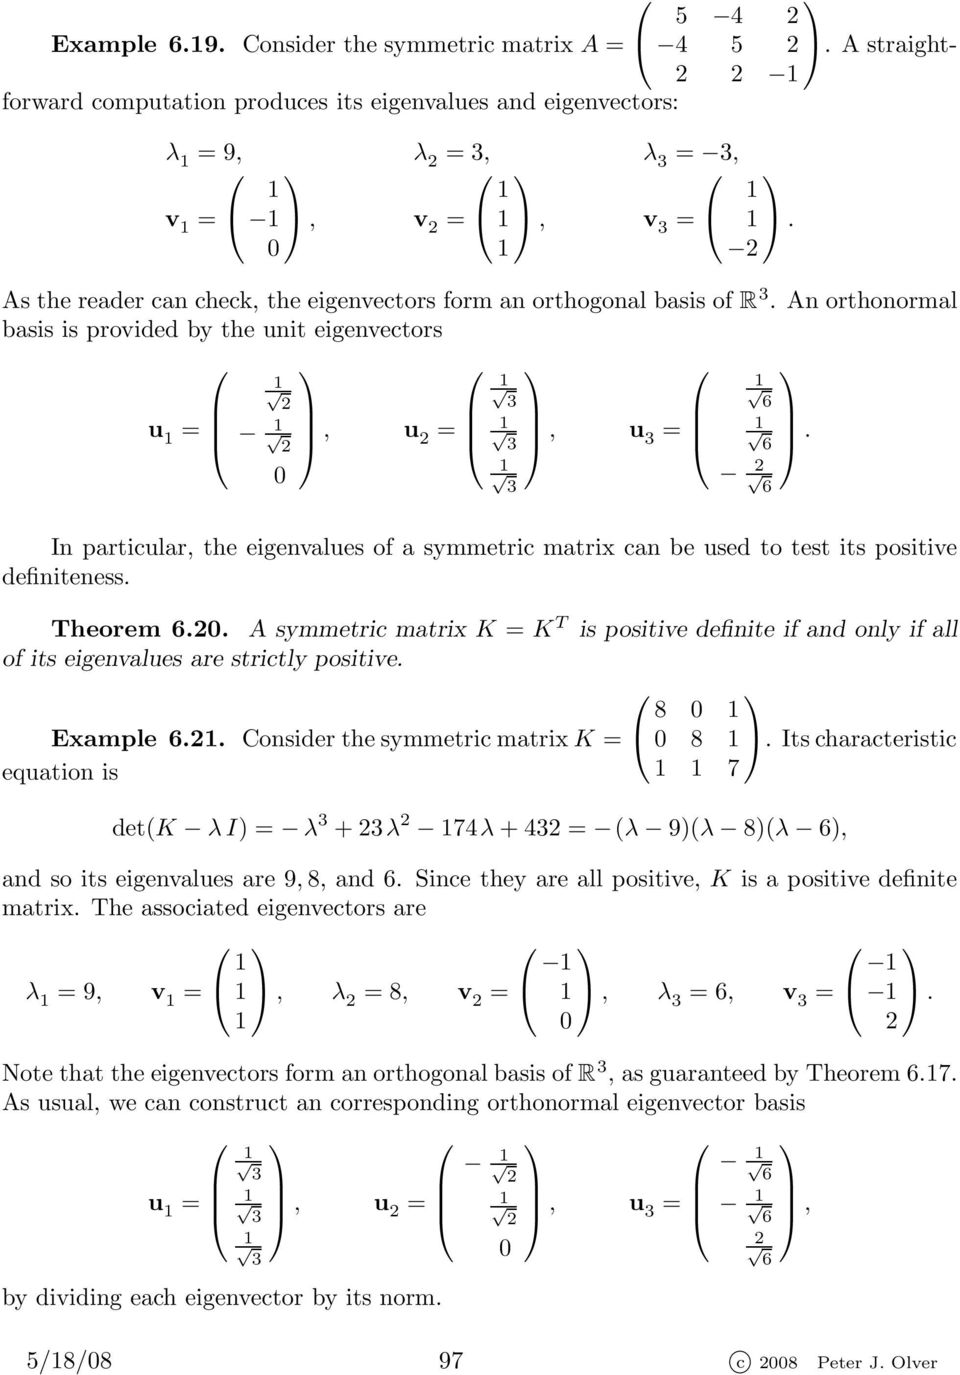 In particular, the eigenvalues of a symmetric matrix can be used to test its positive definiteness. Theorem 6.